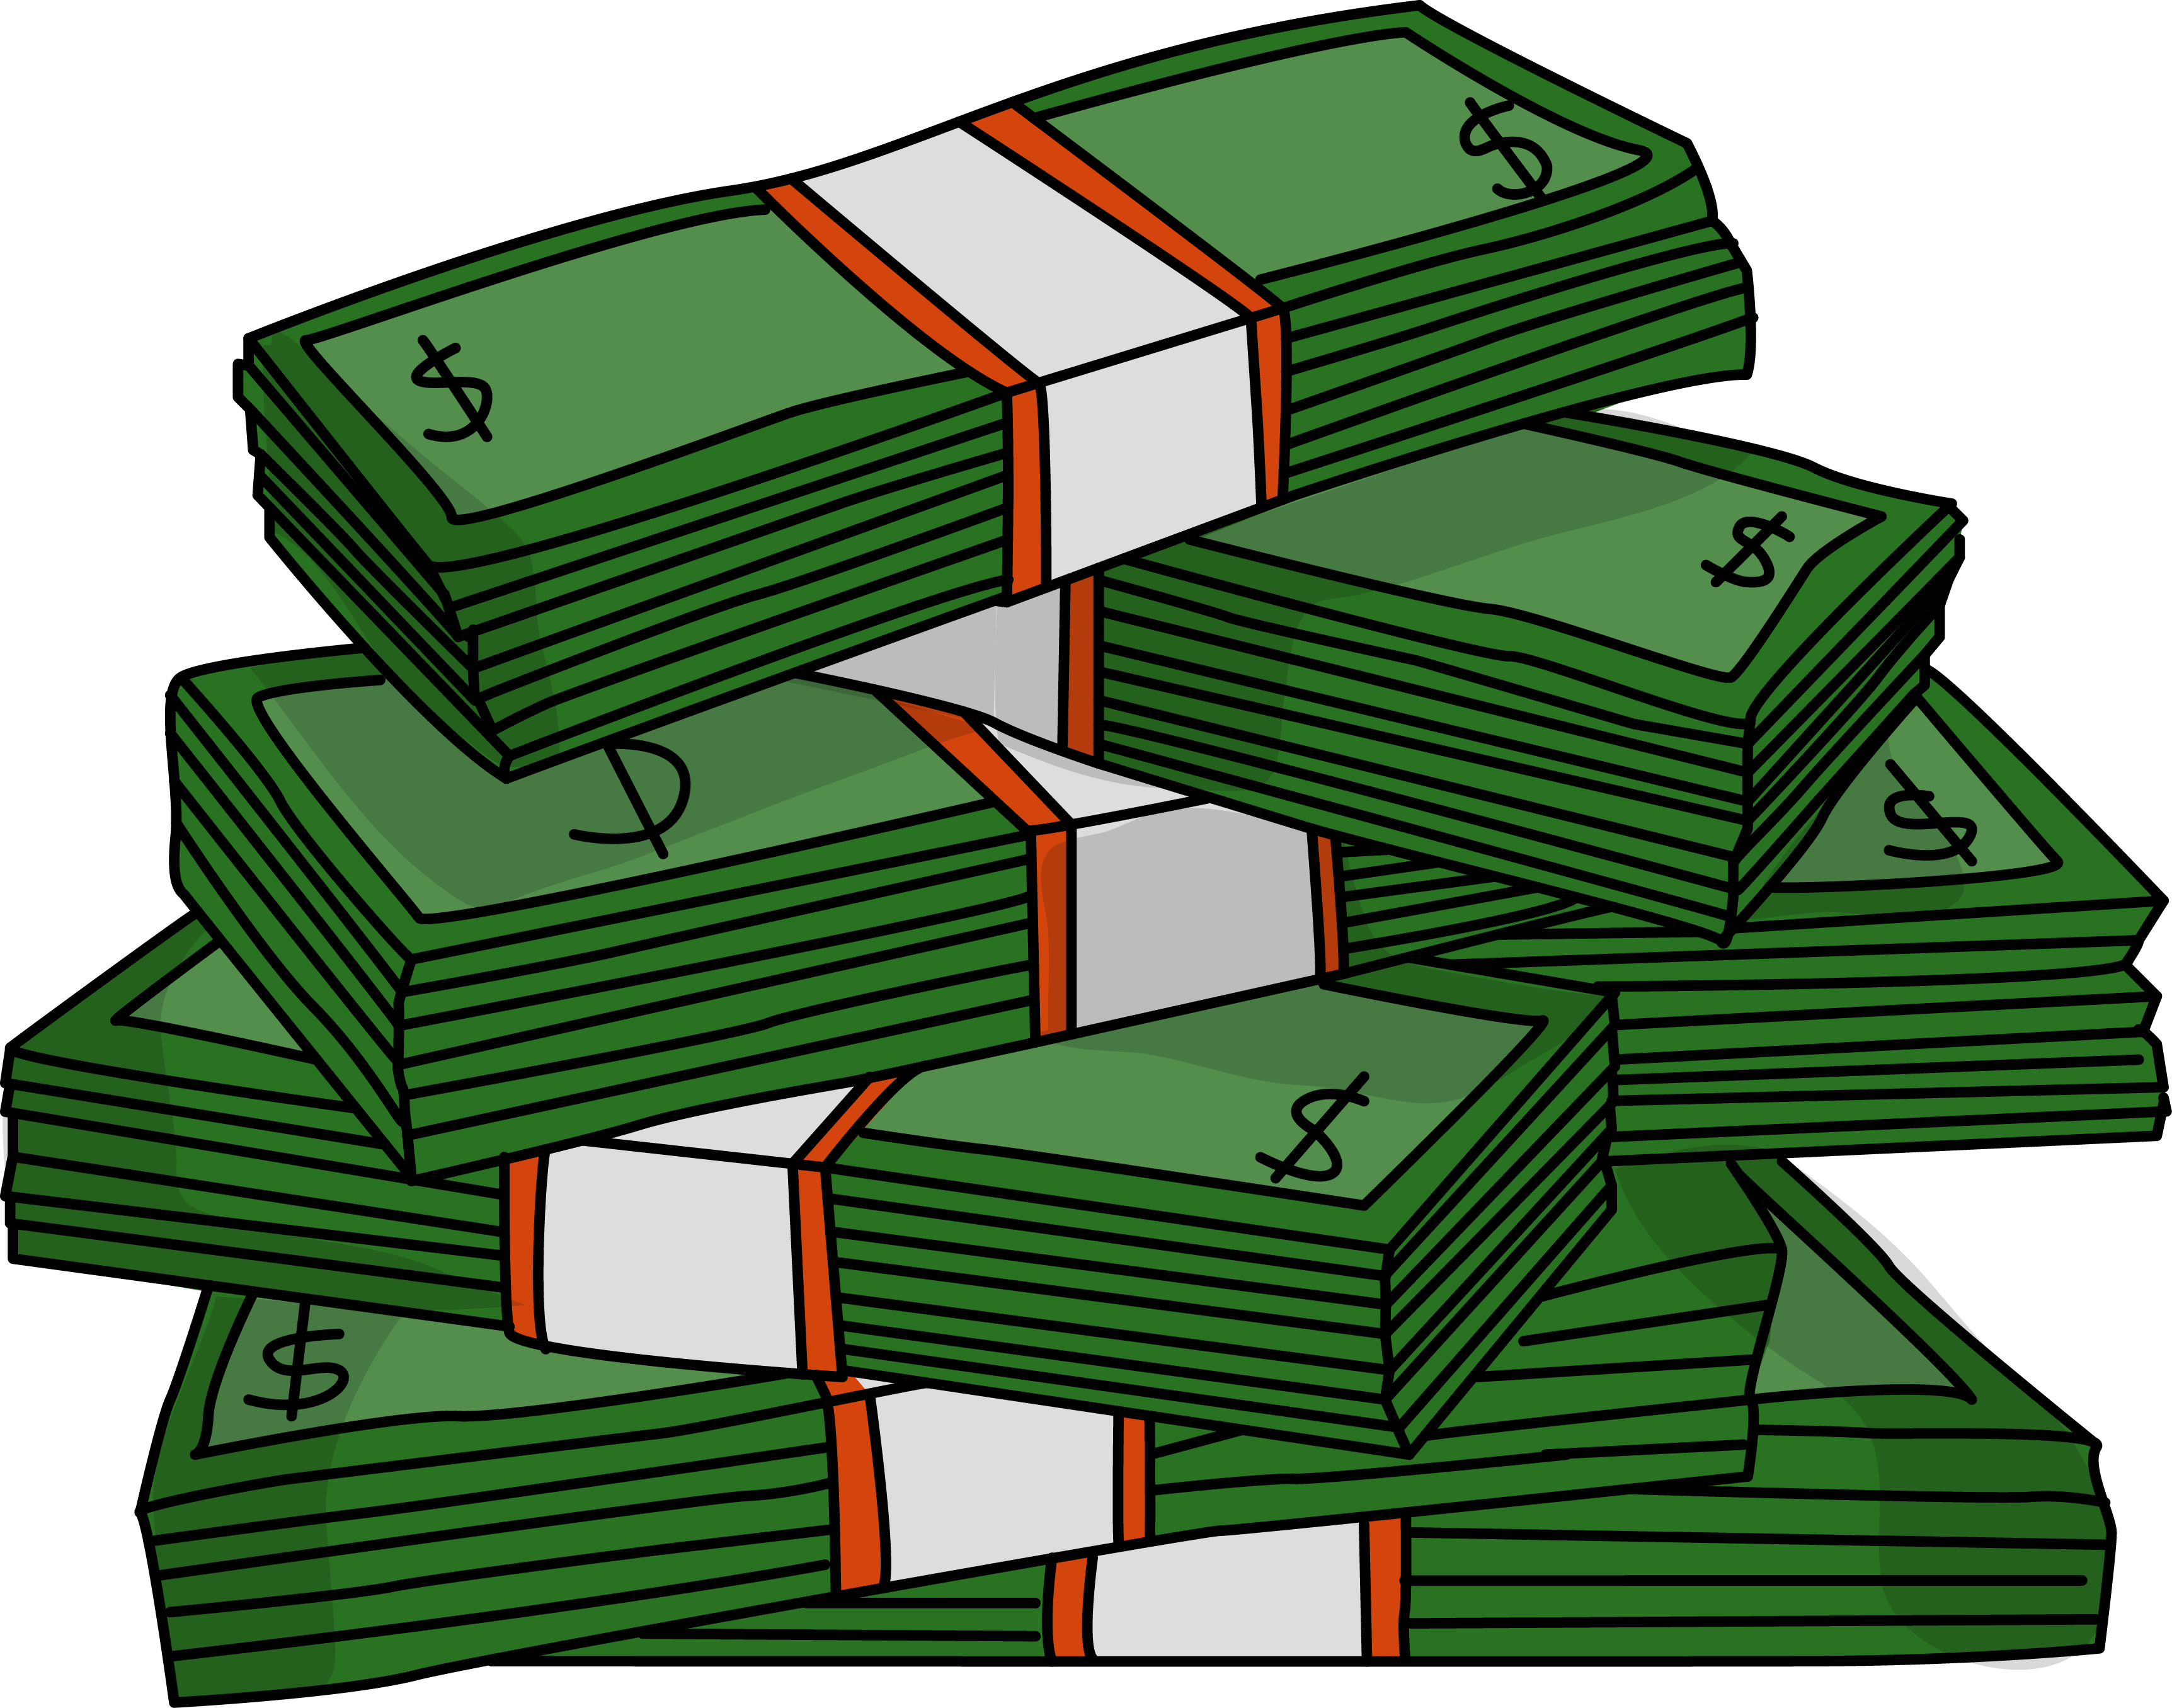 Money clipart stack, Money stack Transparent FREE for